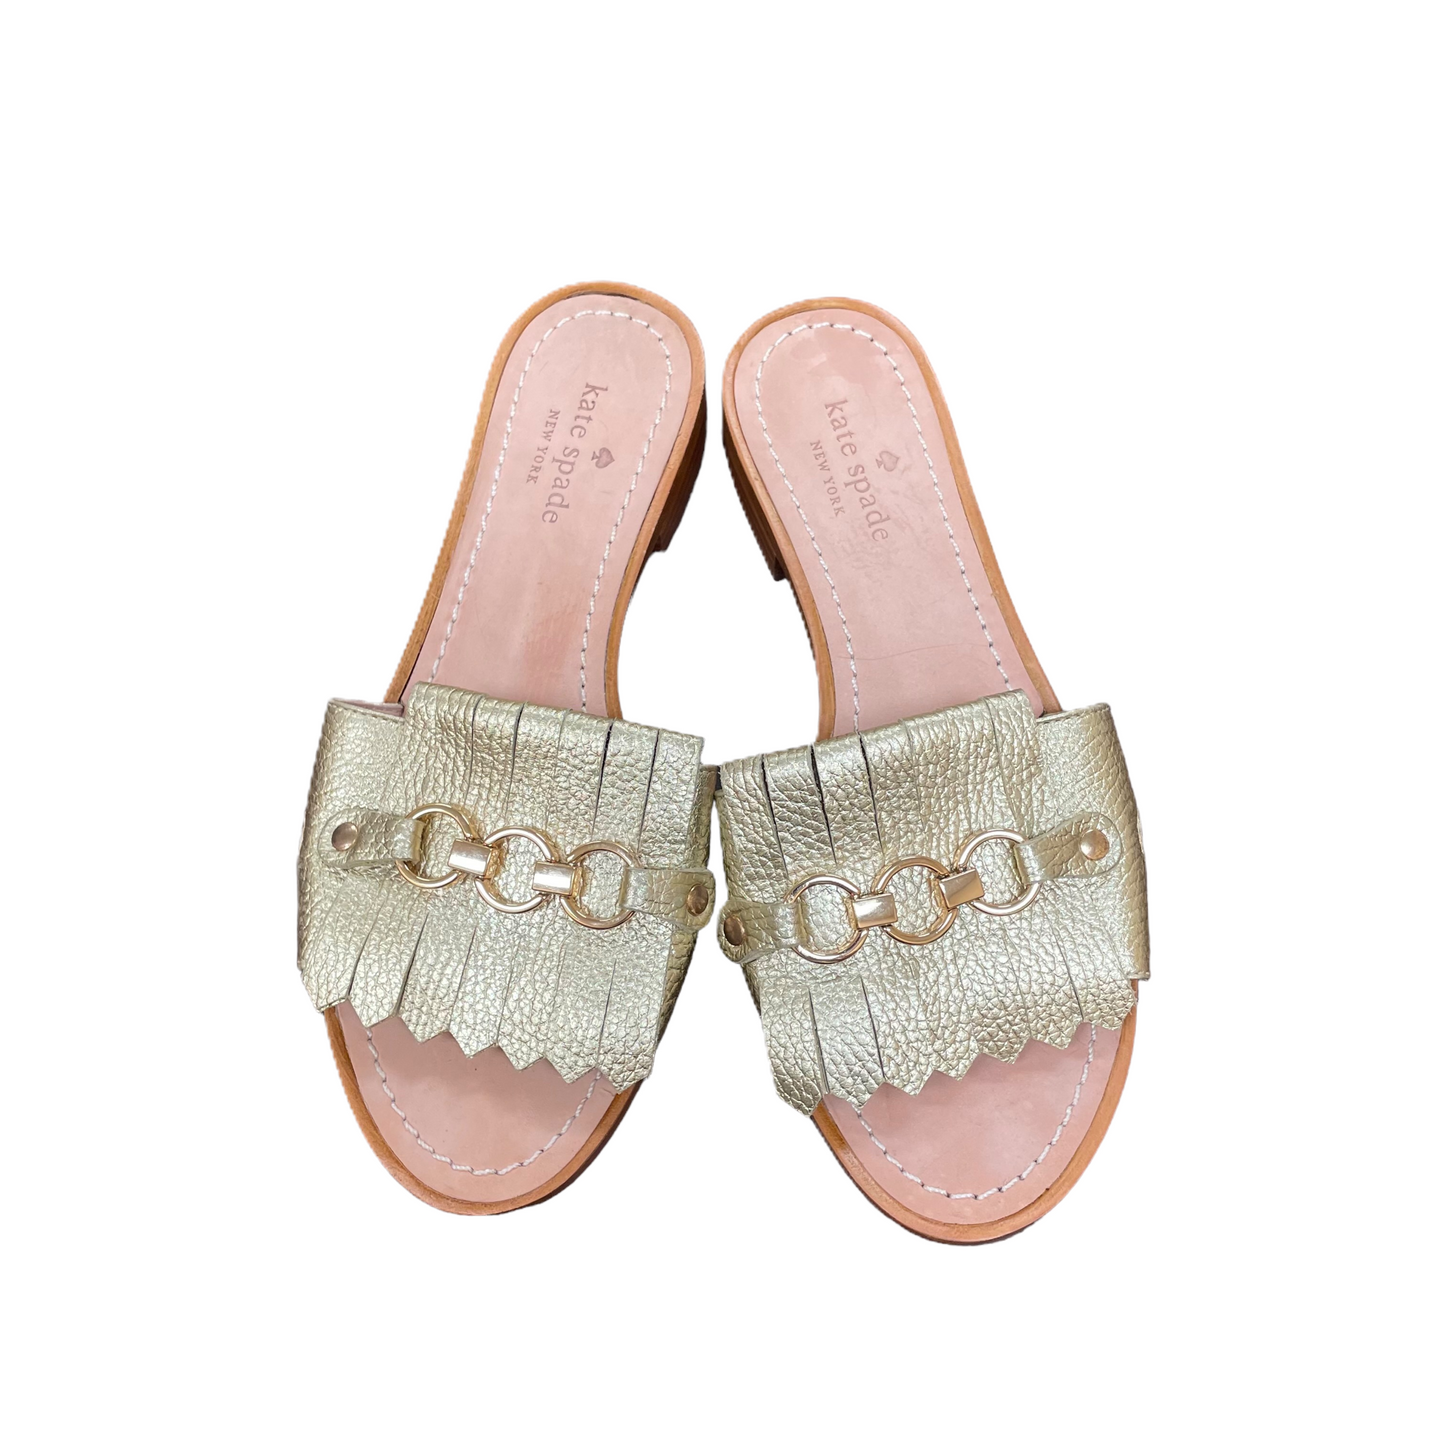 Gold Shoes Flats By Kate Spade, Size: 7